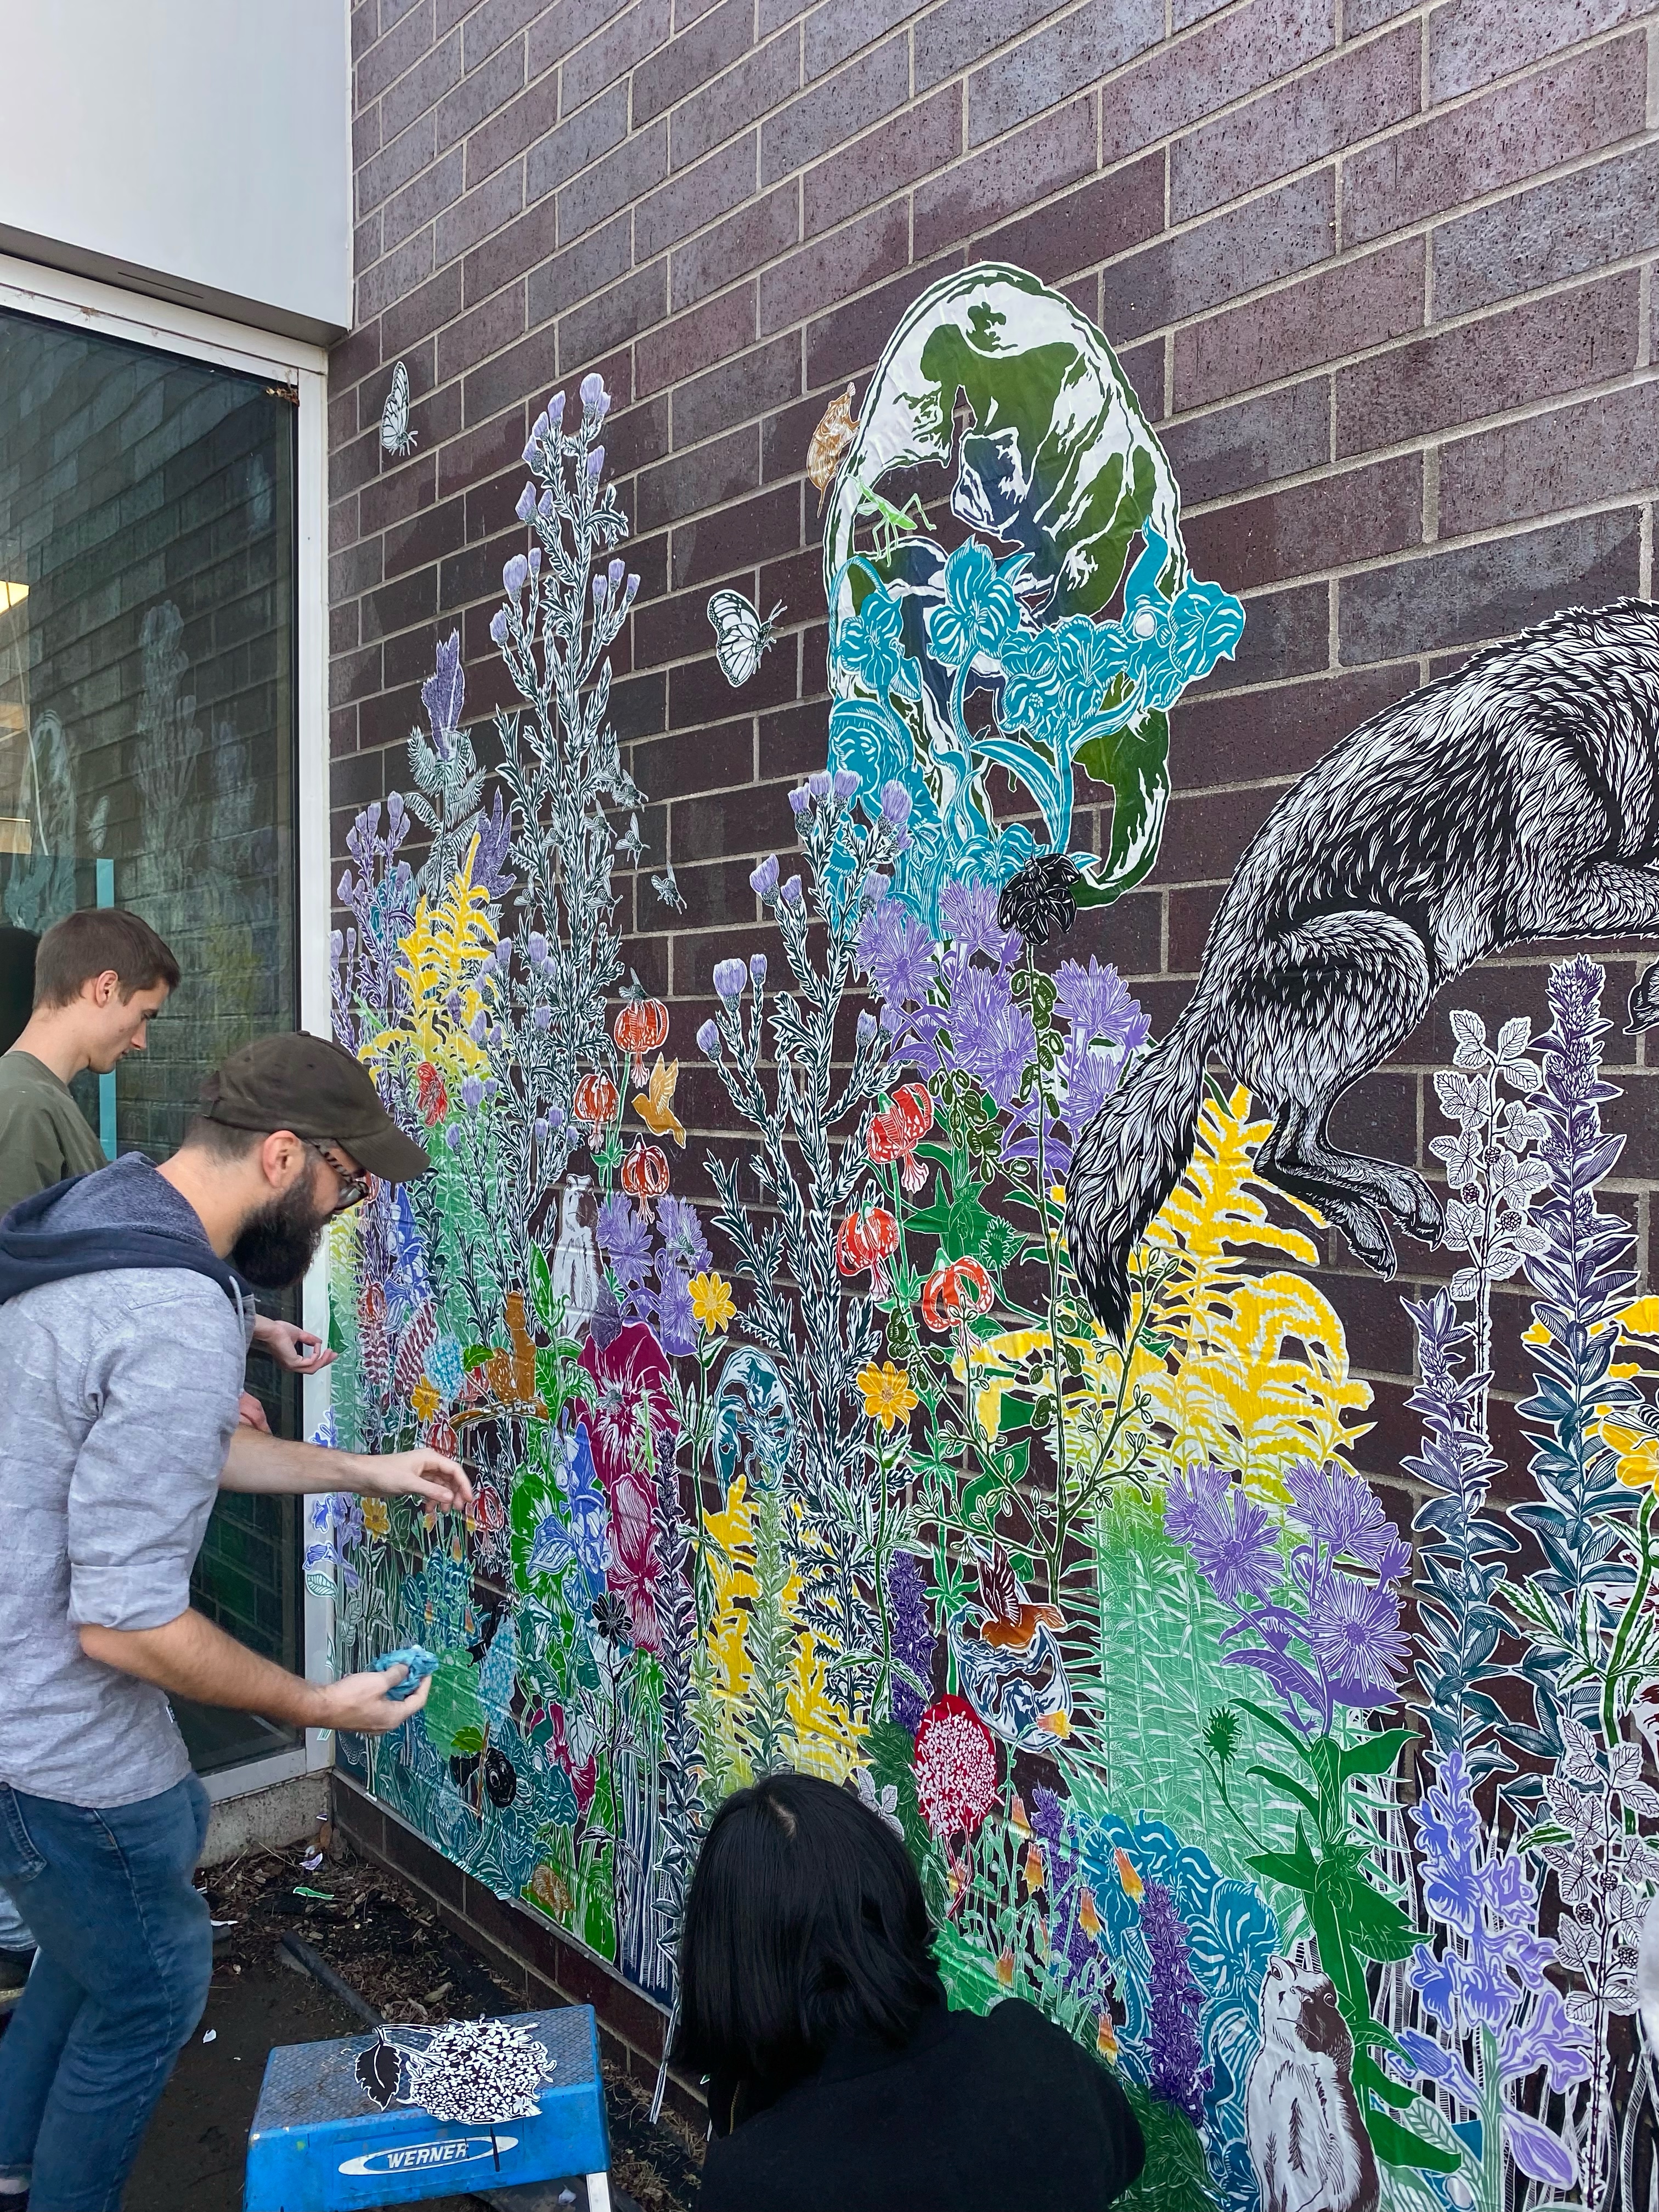 U of I students in ARTS 405 install an intricate paste-up mural on a brick wall. There are two young men to the left, holding pieces of paper to be pasted into the massive collage of plants. Photo by Emmy Lingscheit. 